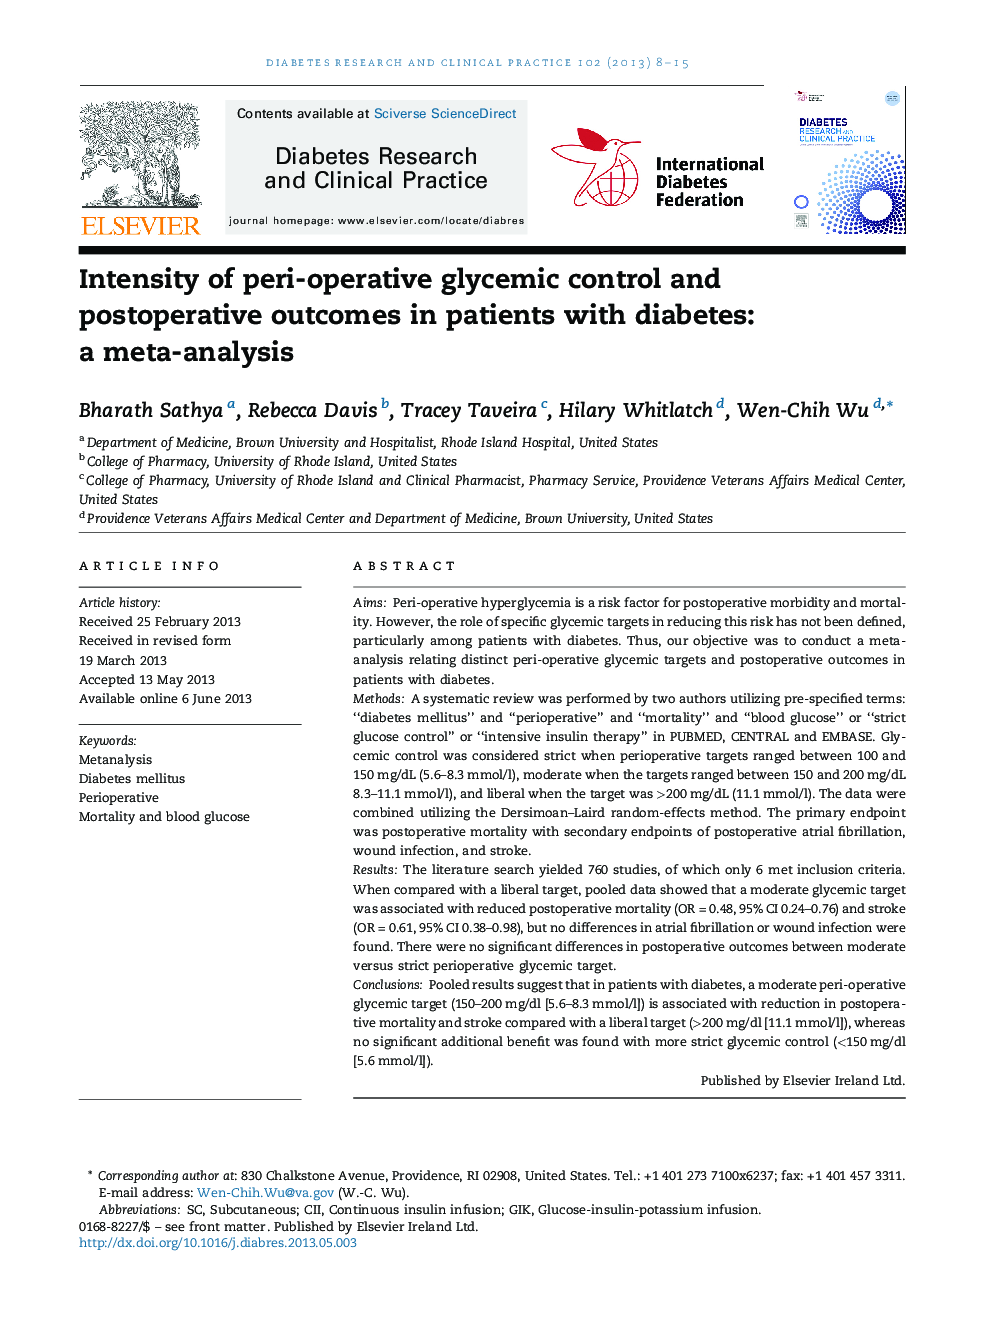 Intensity of peri-operative glycemic control and postoperative outcomes in patients with diabetes: a meta-analysis